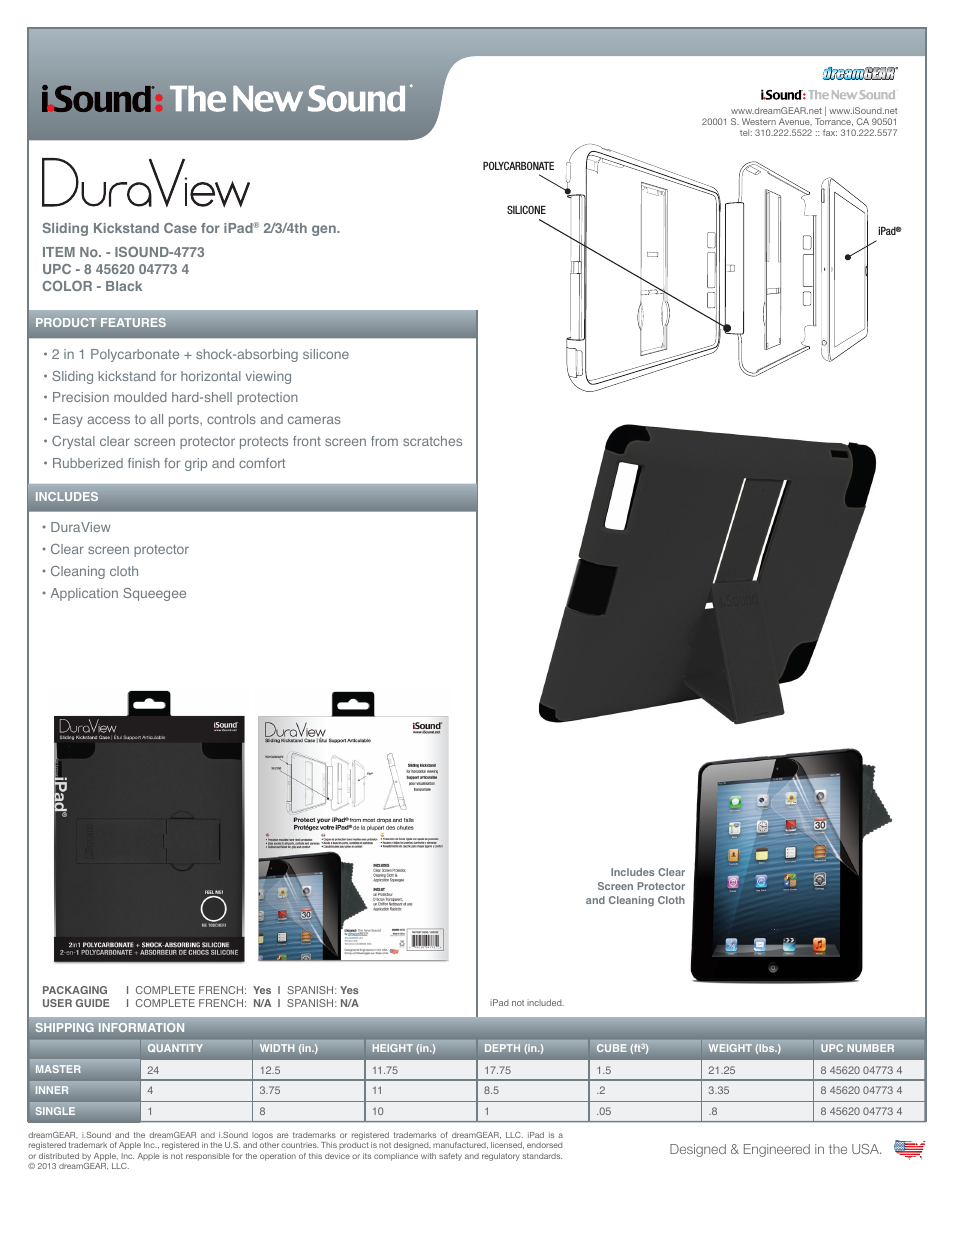 DuraView for iPad2-3-4th gen. - Sell Sheet